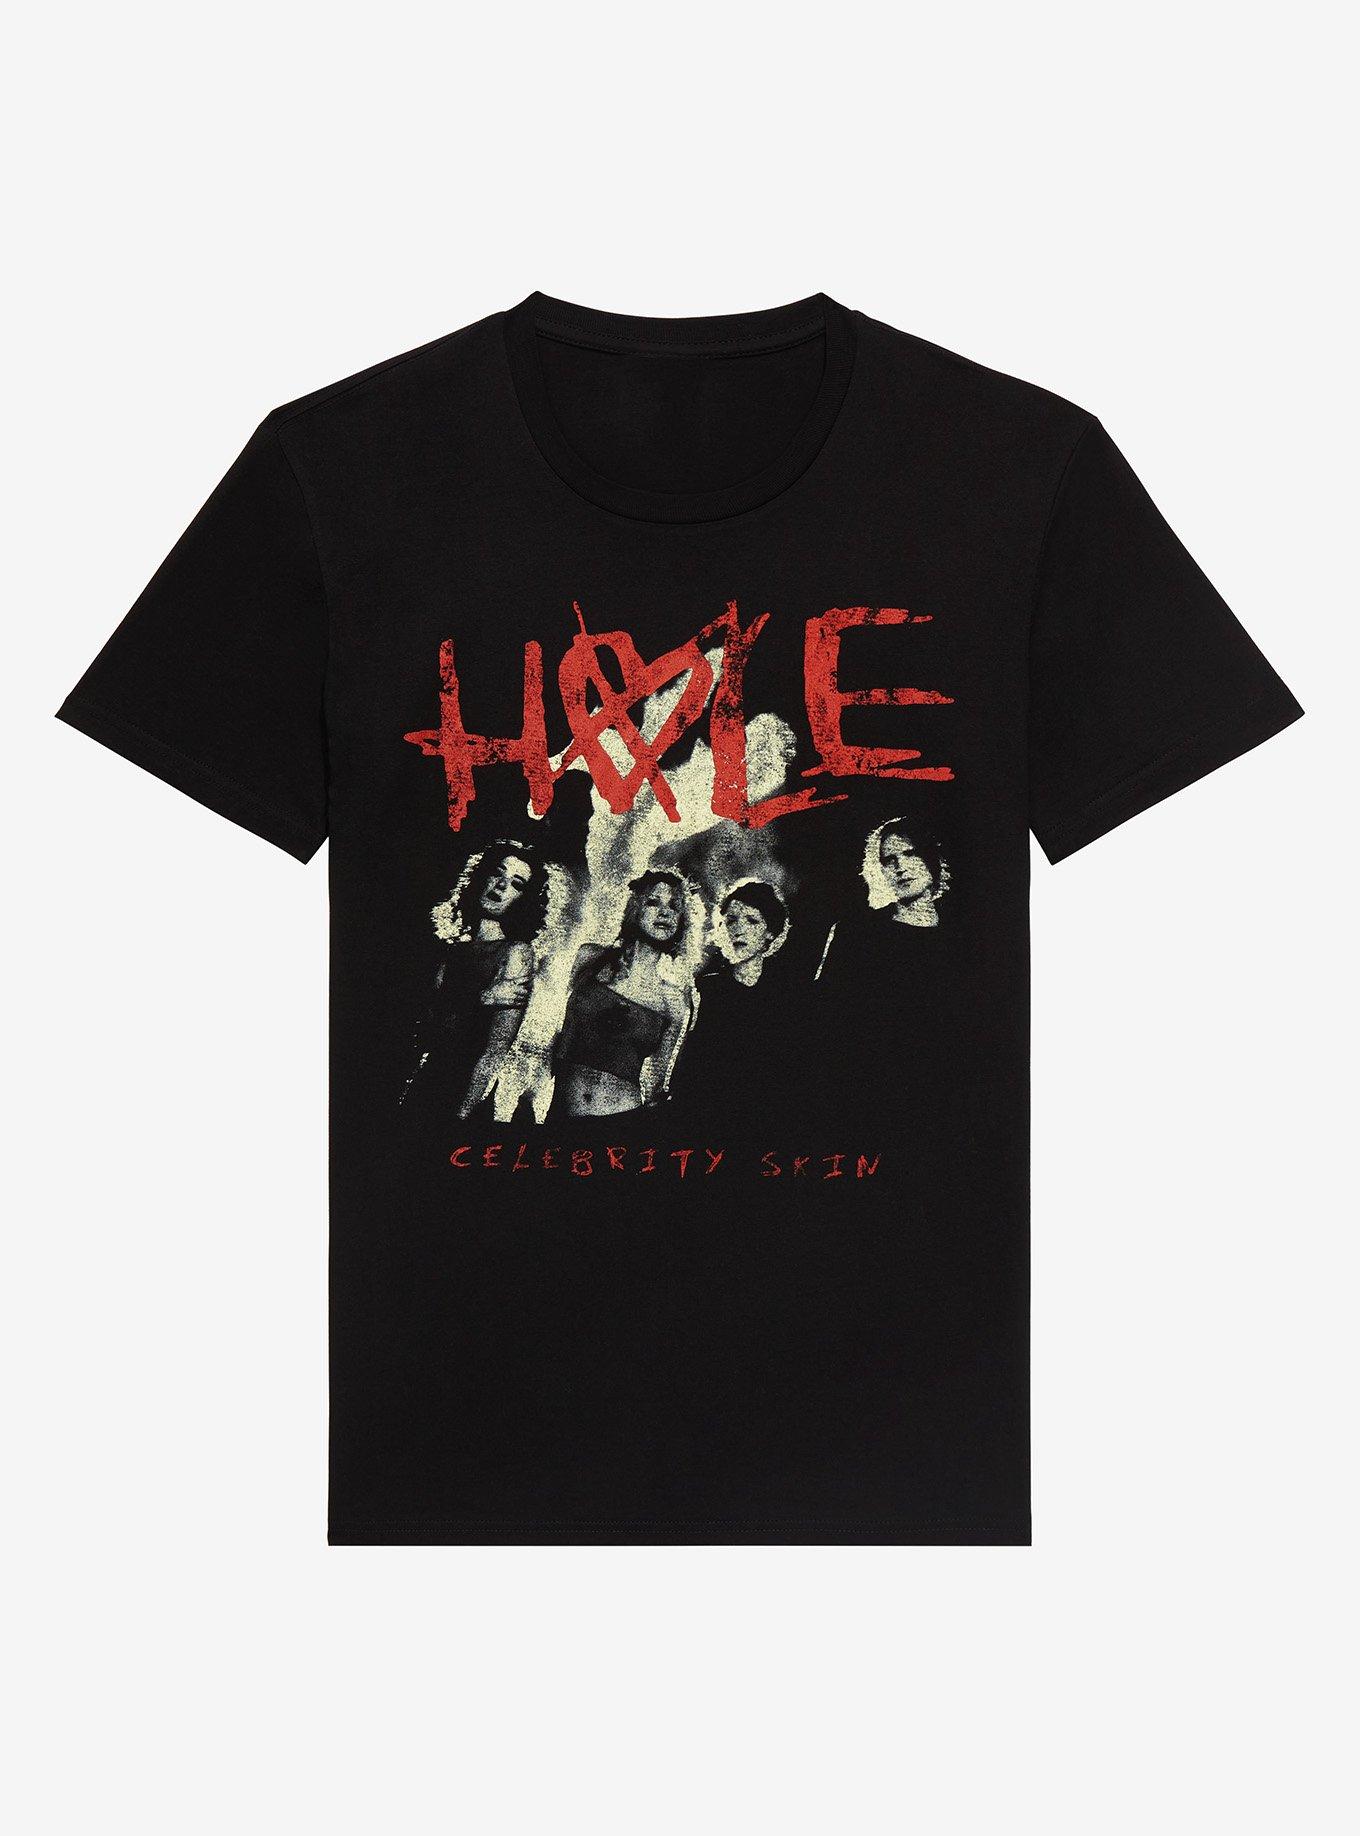 Hole Celebrity Skin Album Cover T-Shirt | Hot Topic